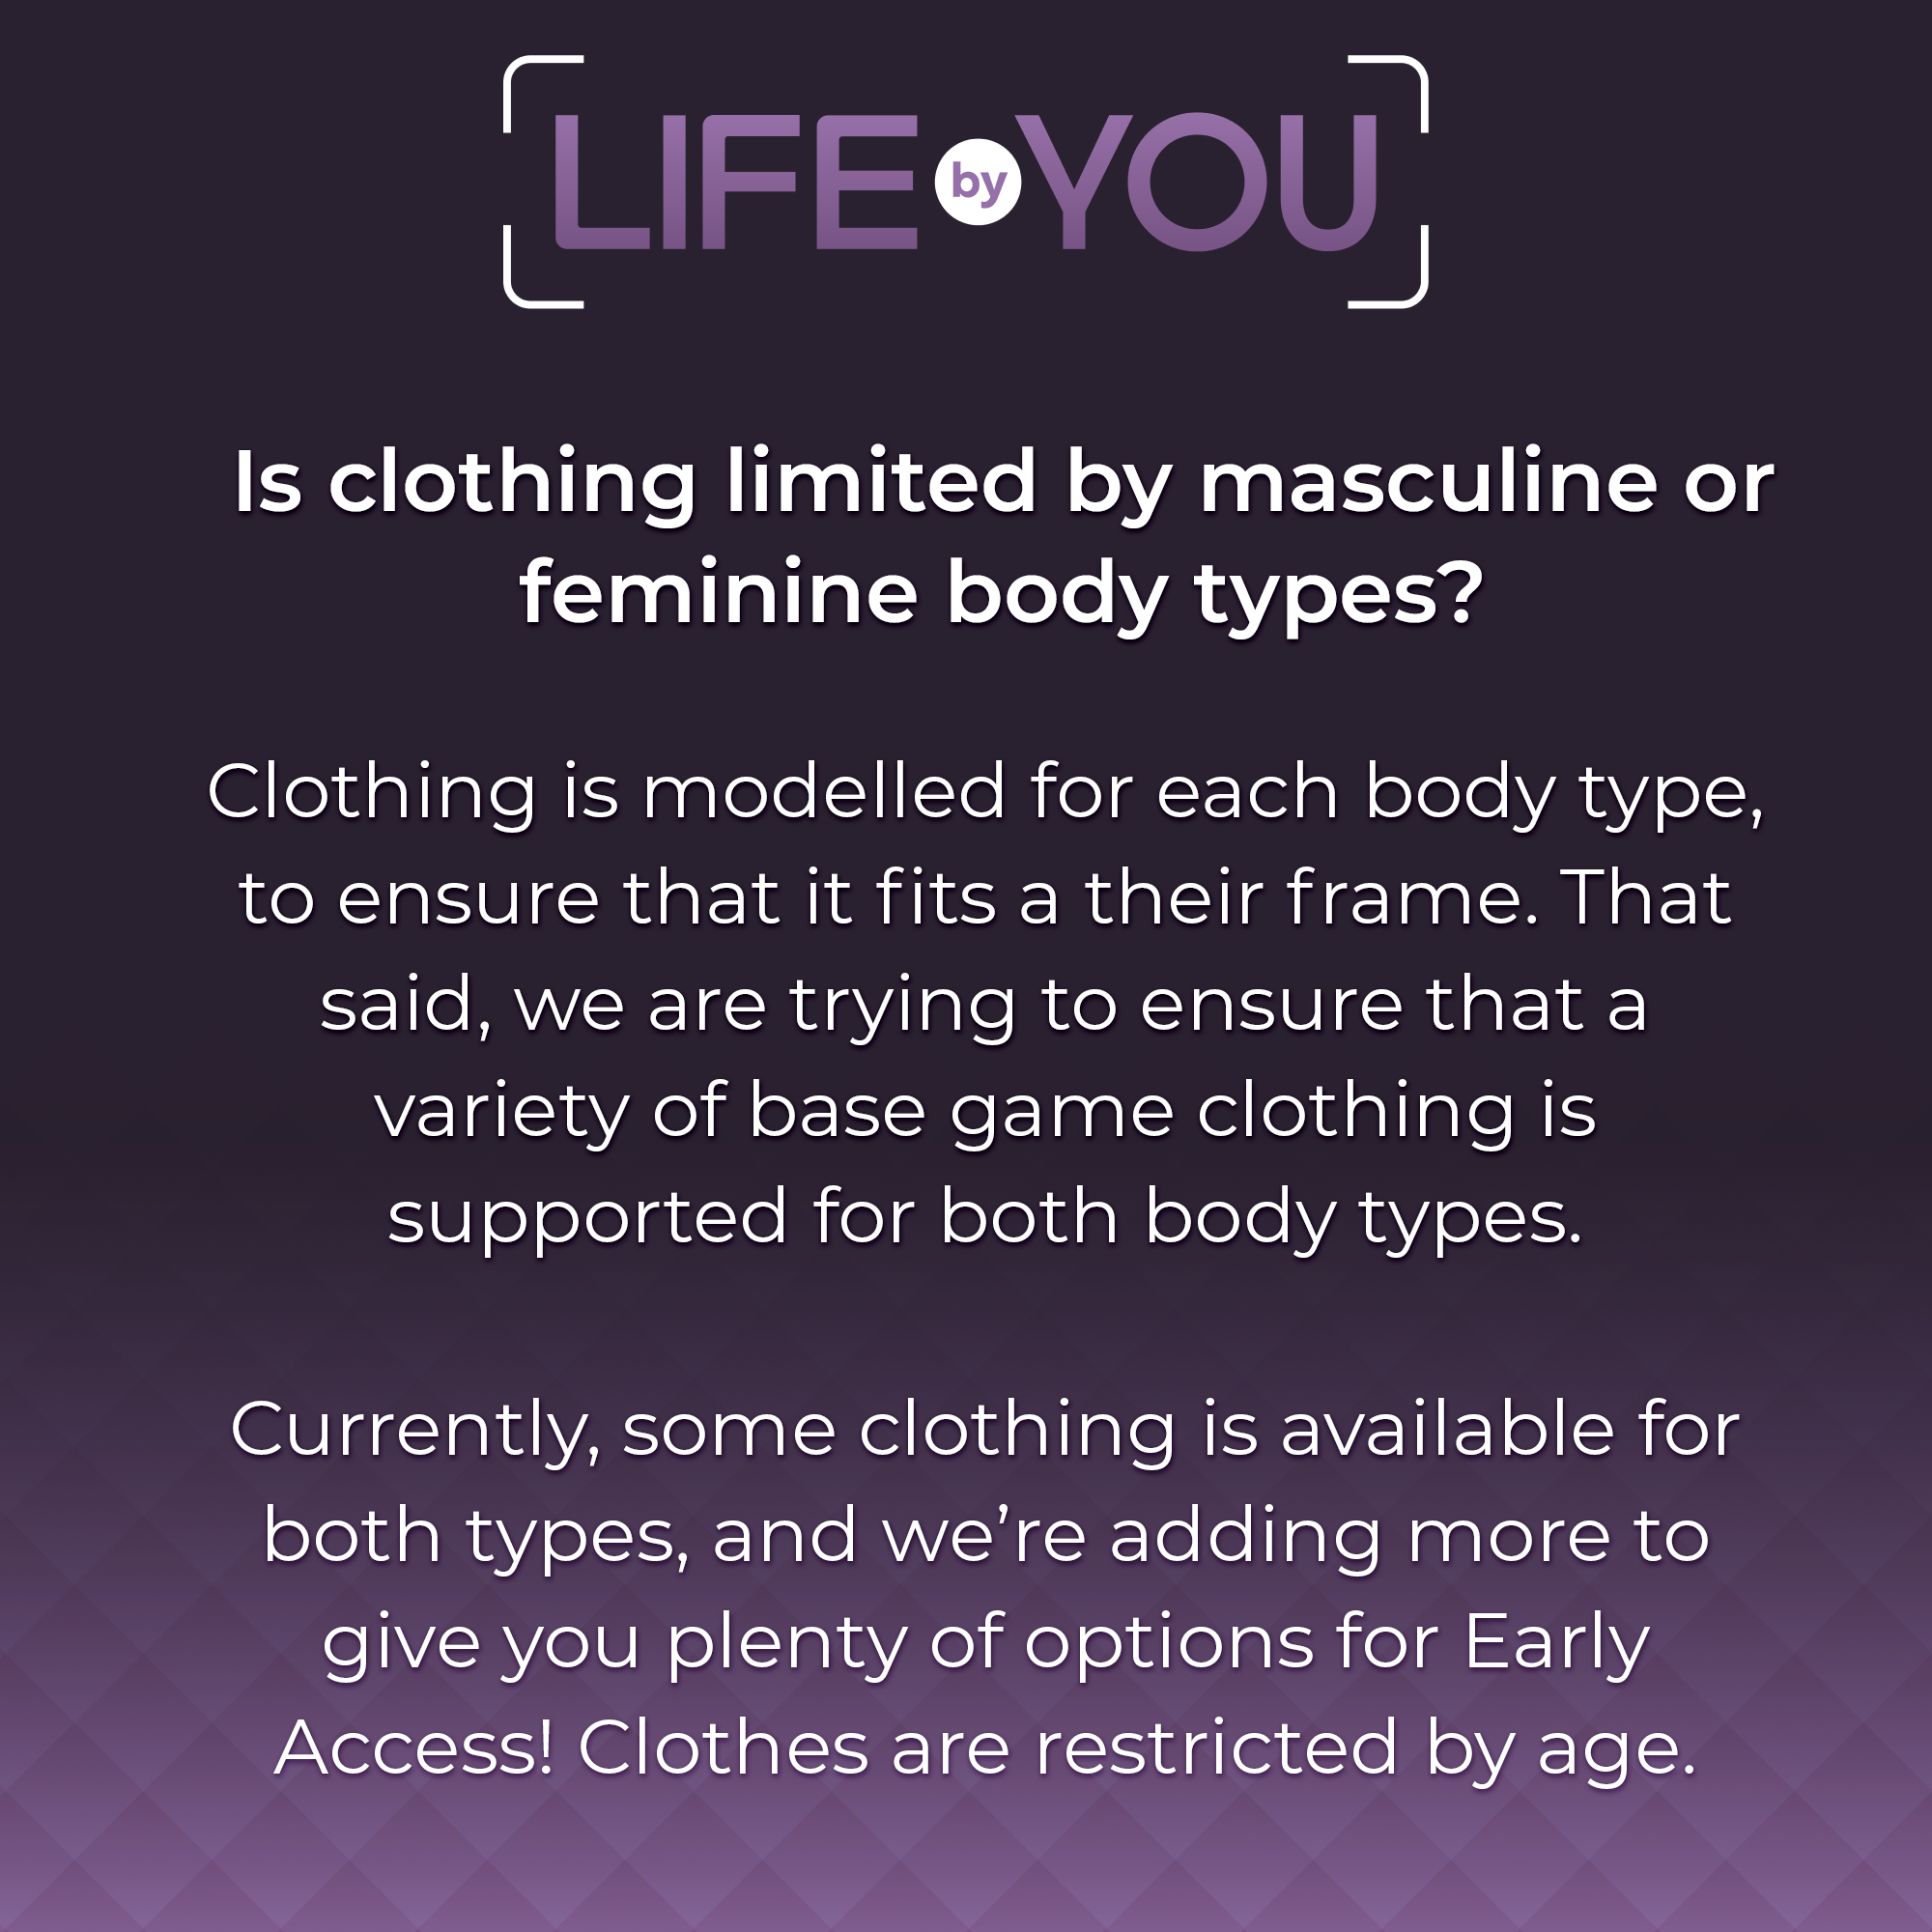 QnA Is clothing limited by body type?